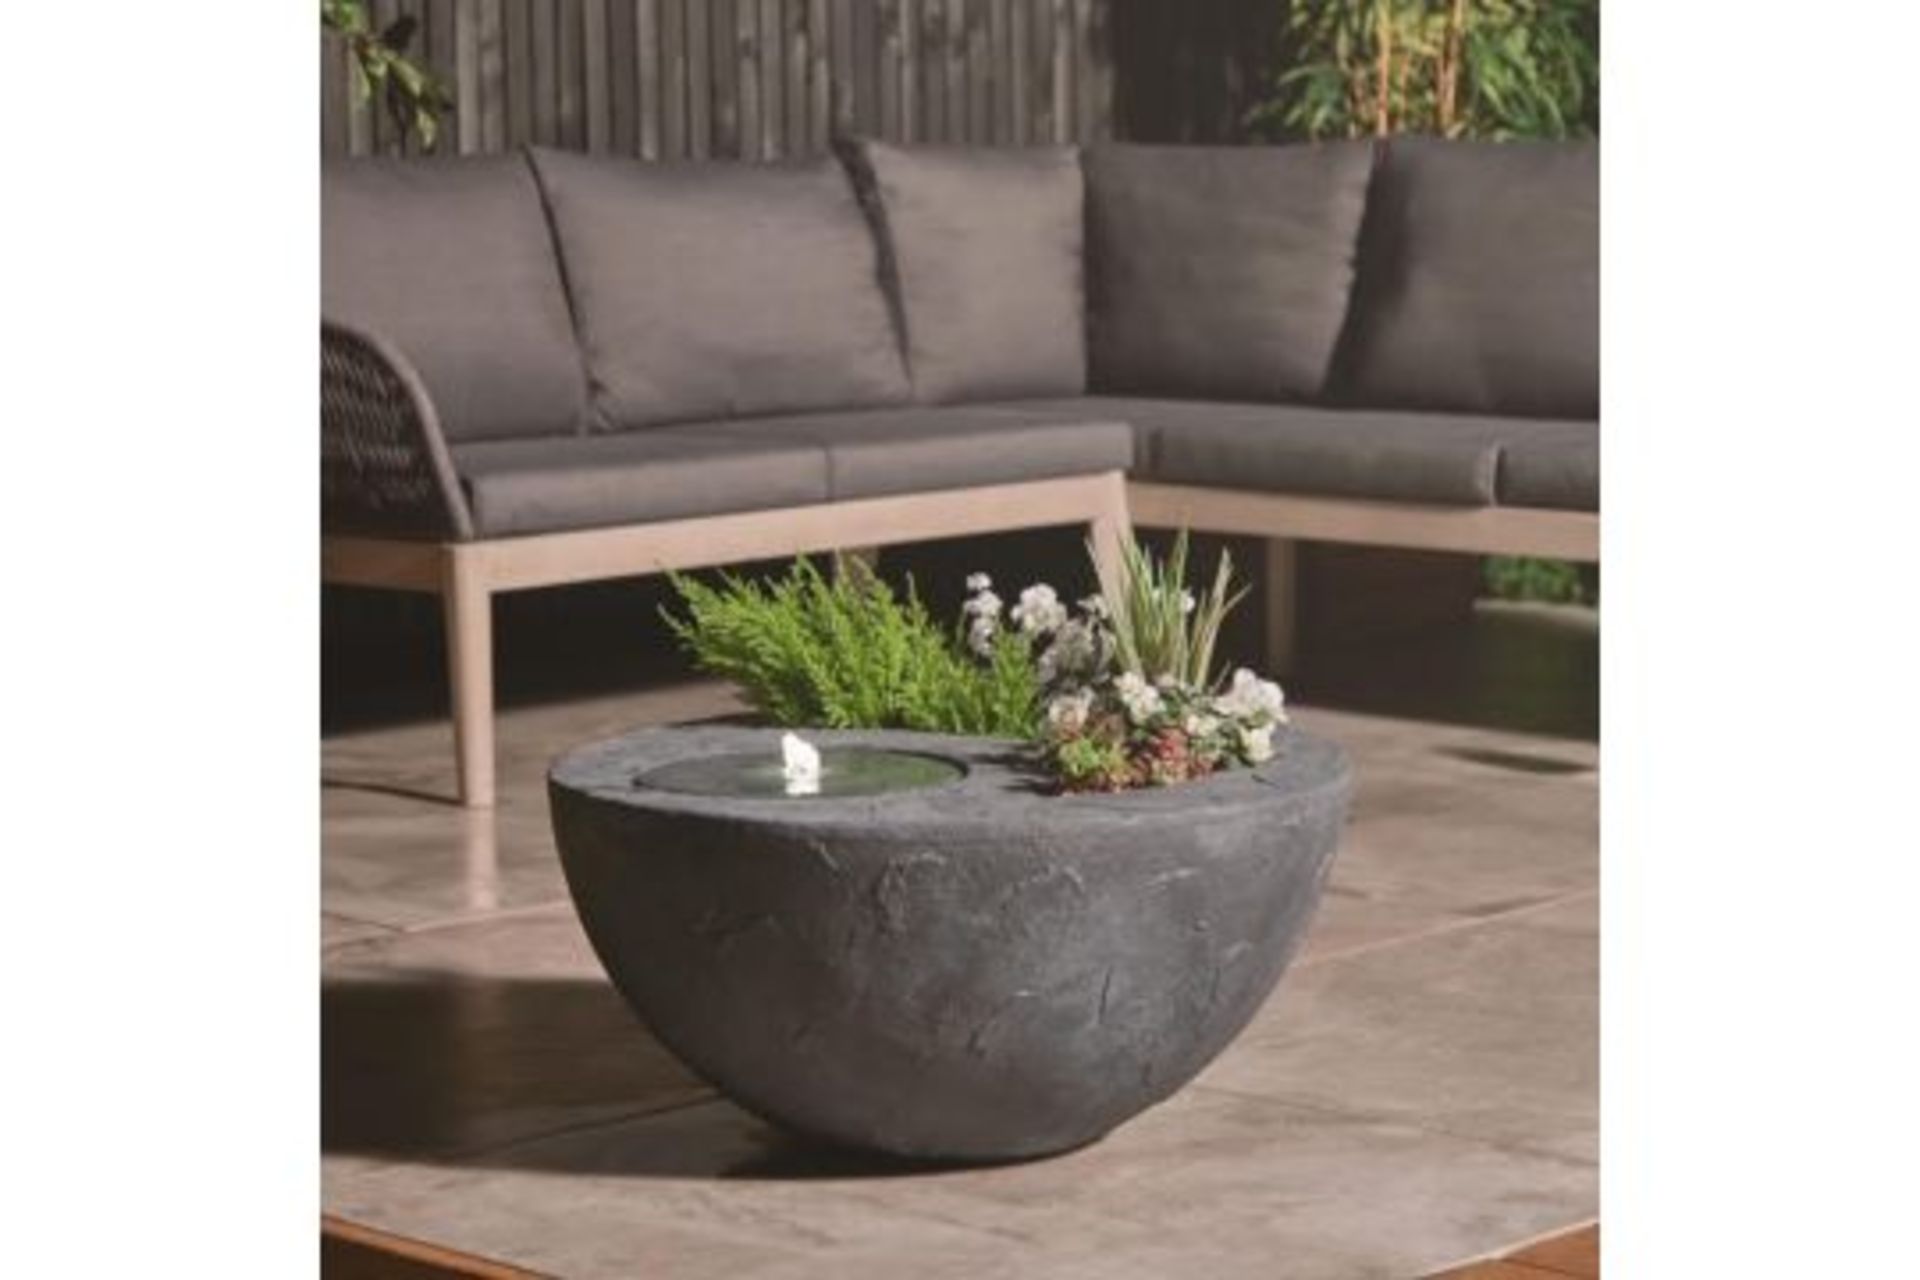 New & Boxed Dual Water Feature and Planter - Garden Bowl Design Planter, Indoor/Outdoor LED Lights - Image 2 of 3